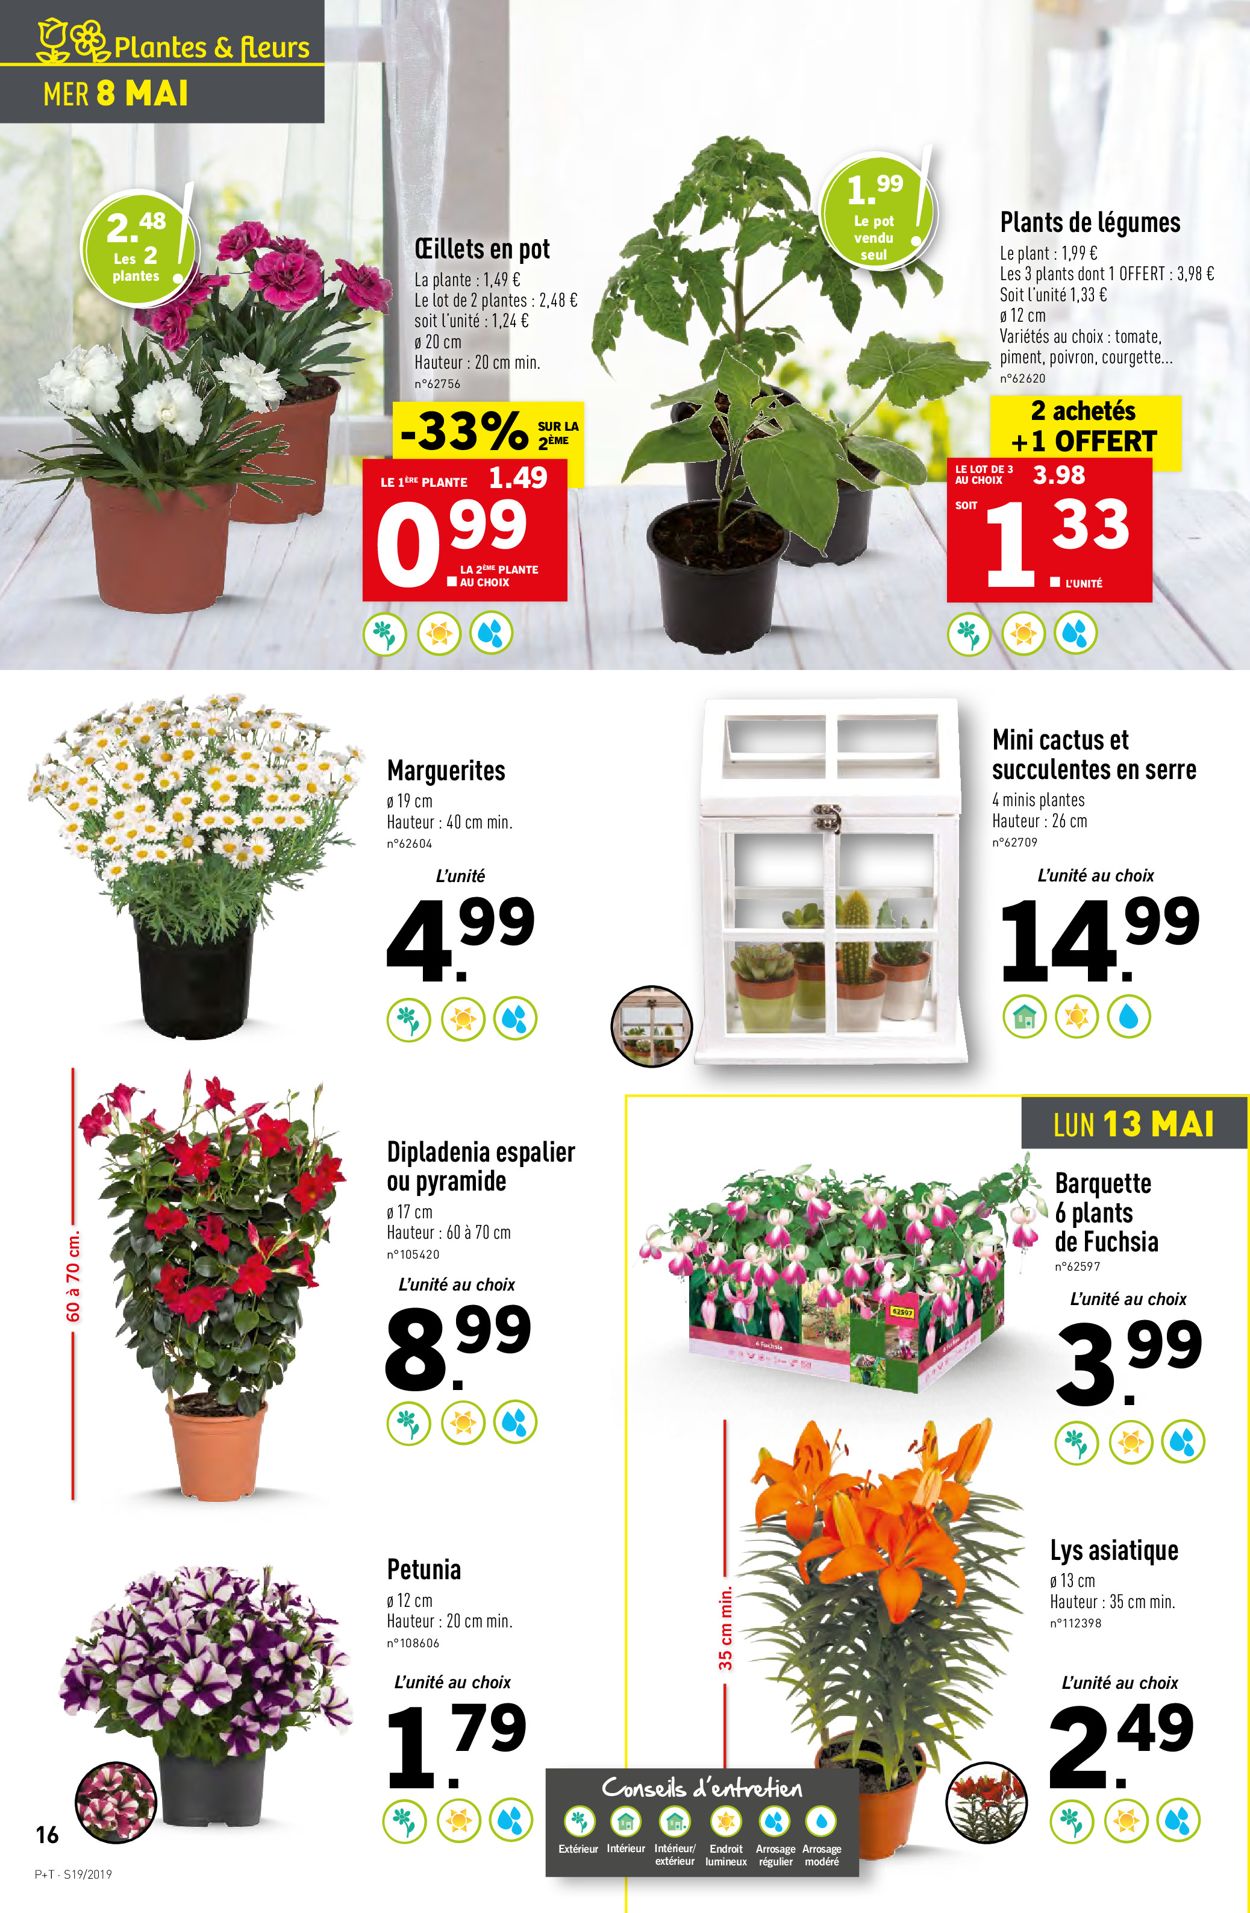 Lidl Catalogue - 08.05-14.05.2019 (Page 16)